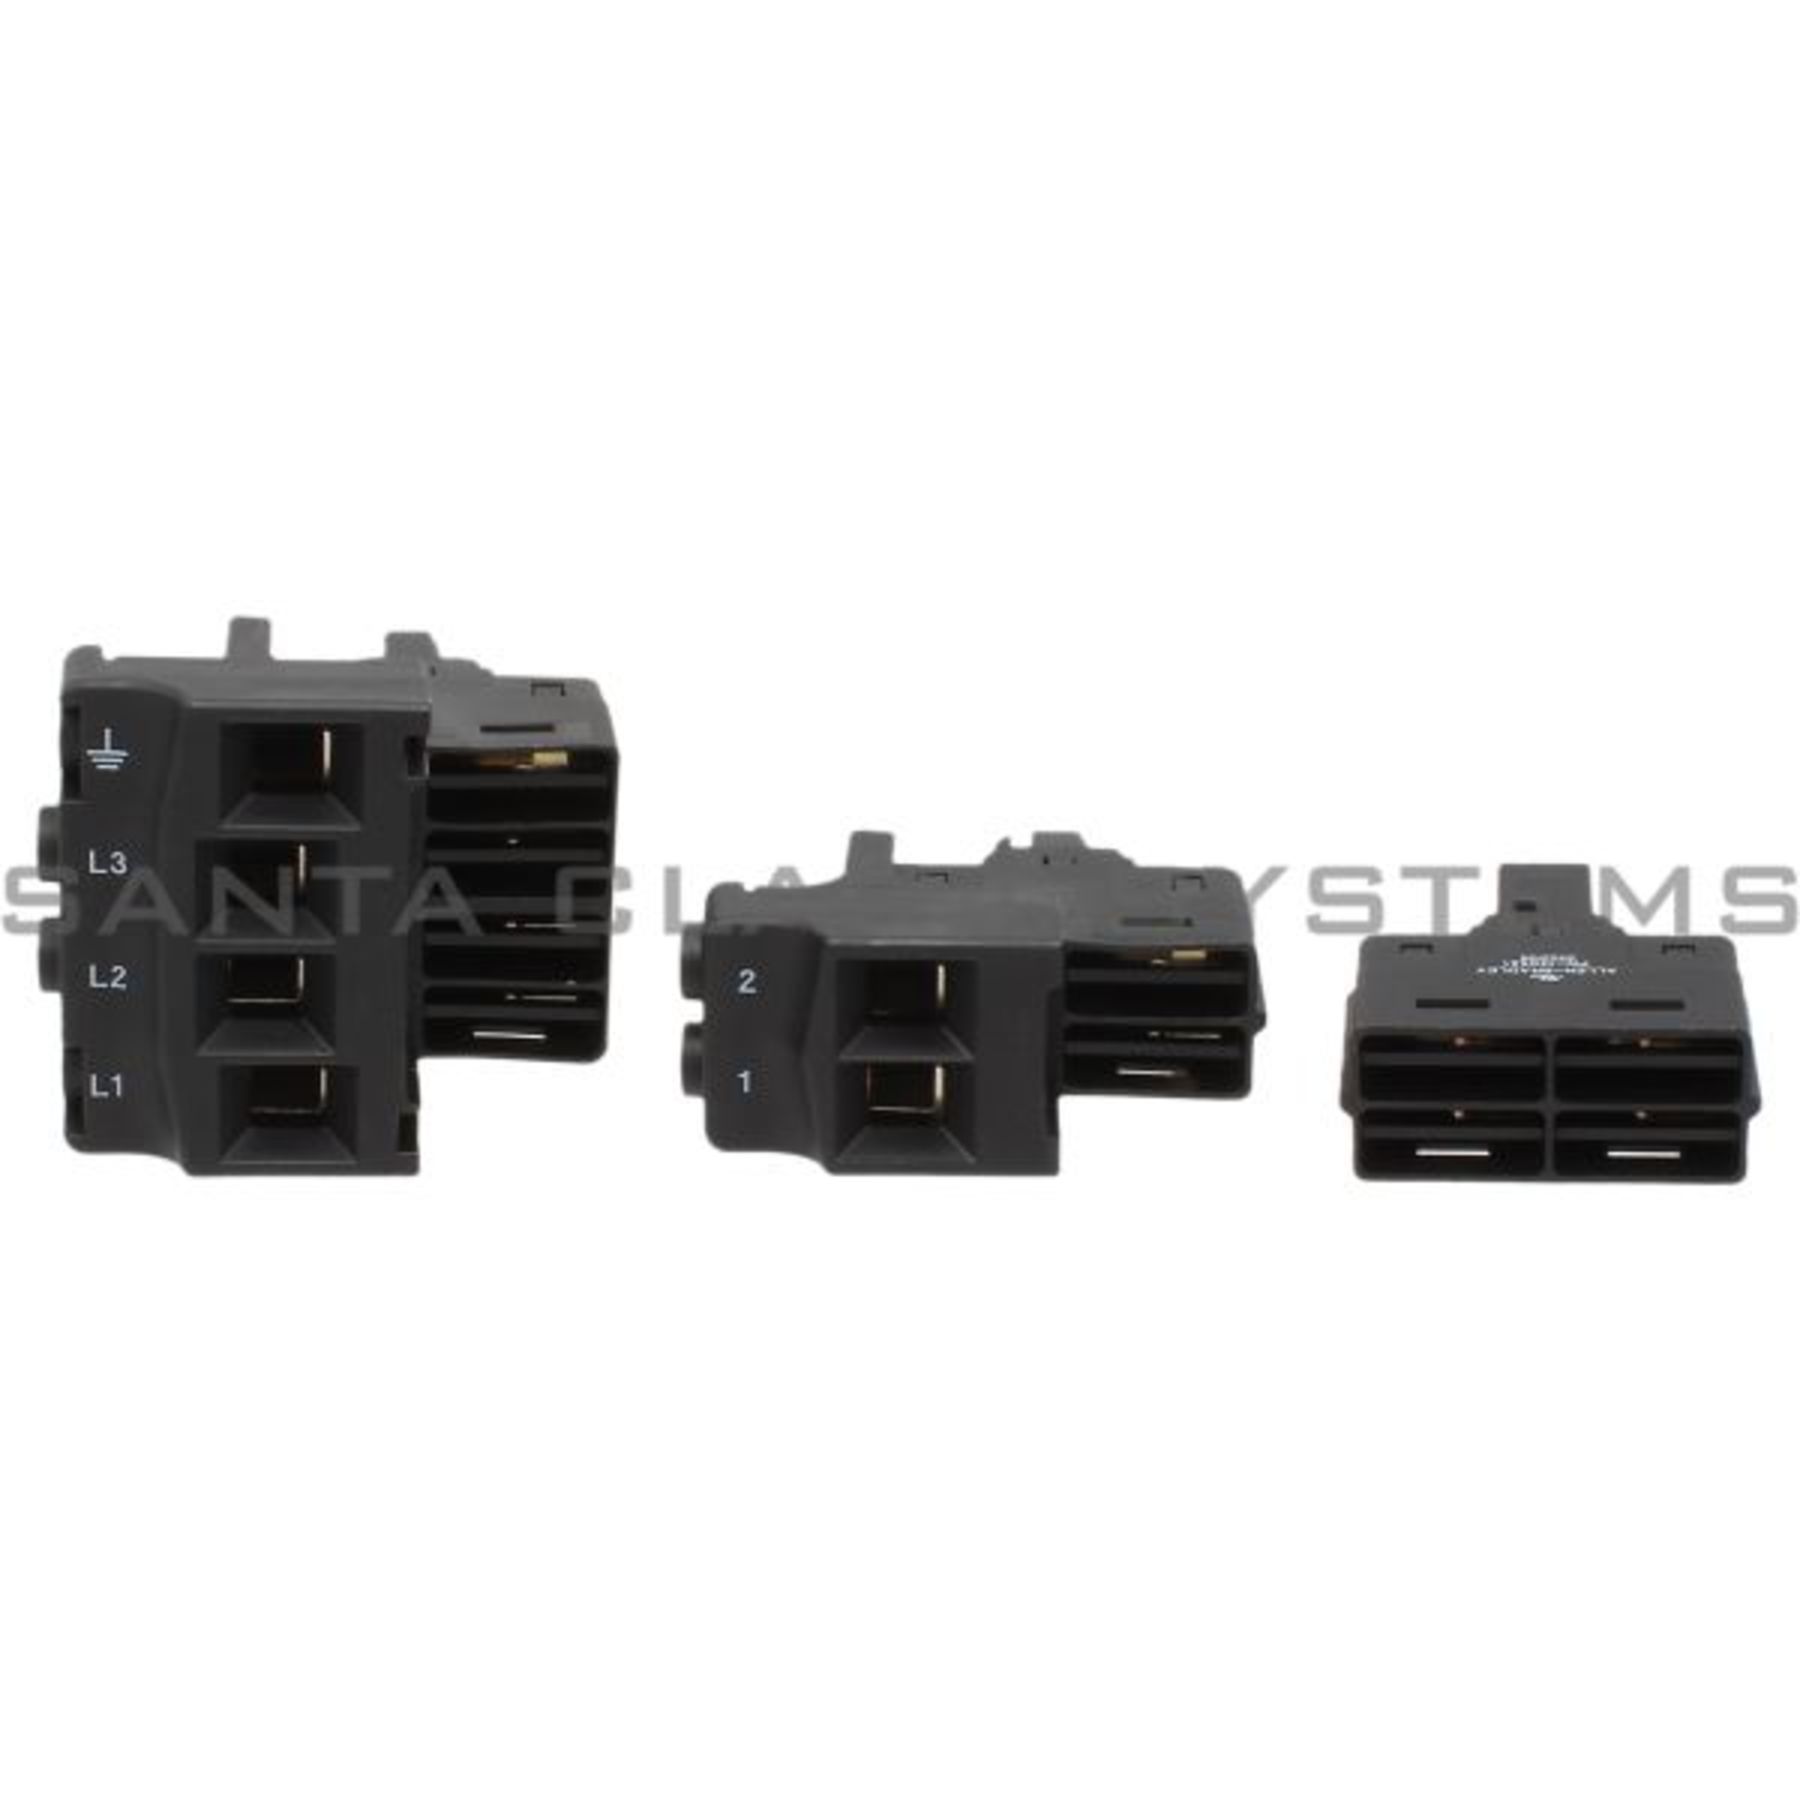 Rockwell Automation 2198-H040-ADP-T Shared Bus Connector Kit, For